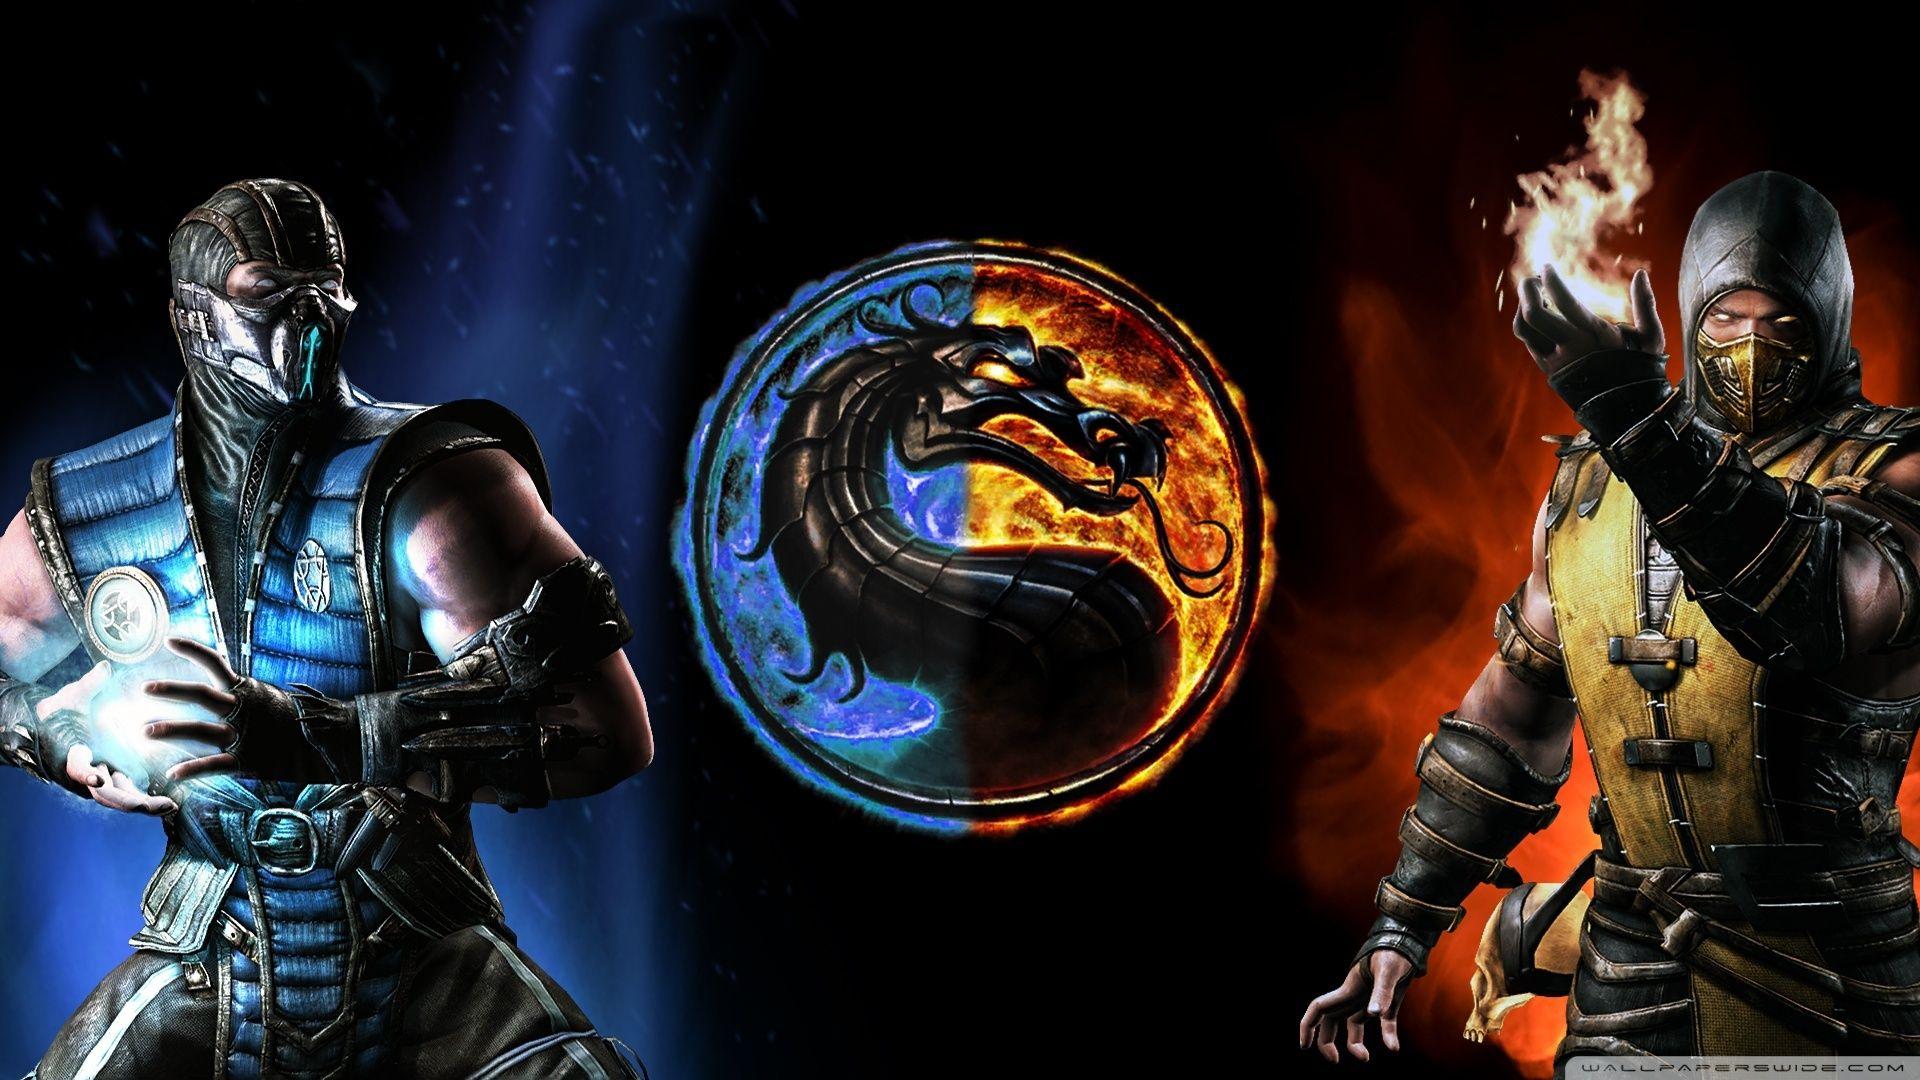 hwat mortal kombat game is the one with chess